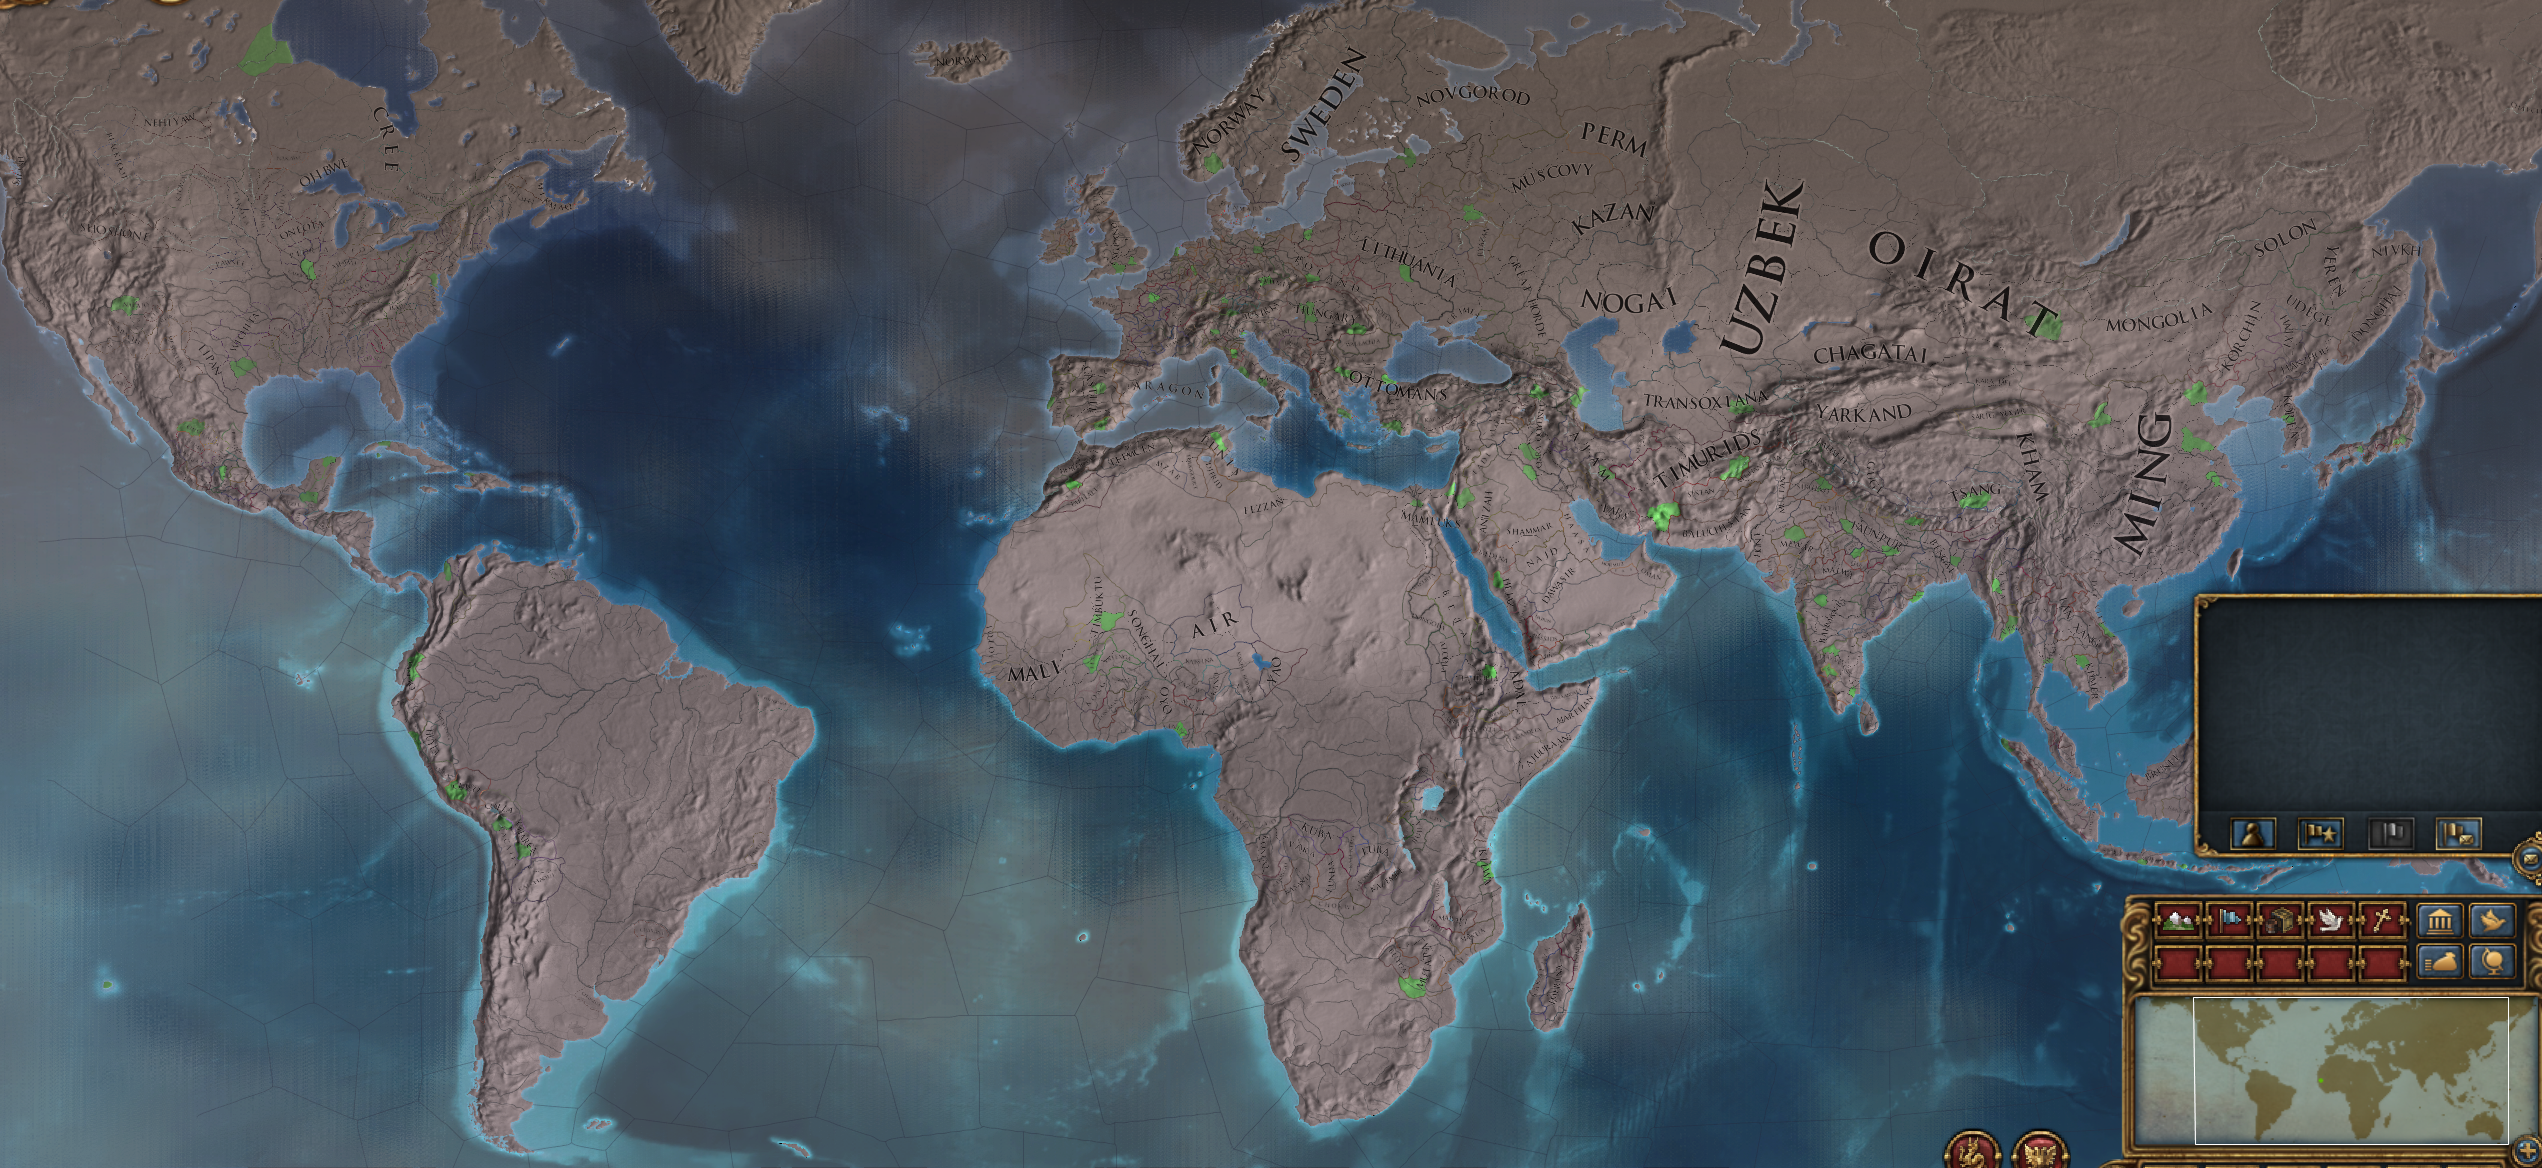 Europa Universalis 4: Leviathan's Rough Launch Secures